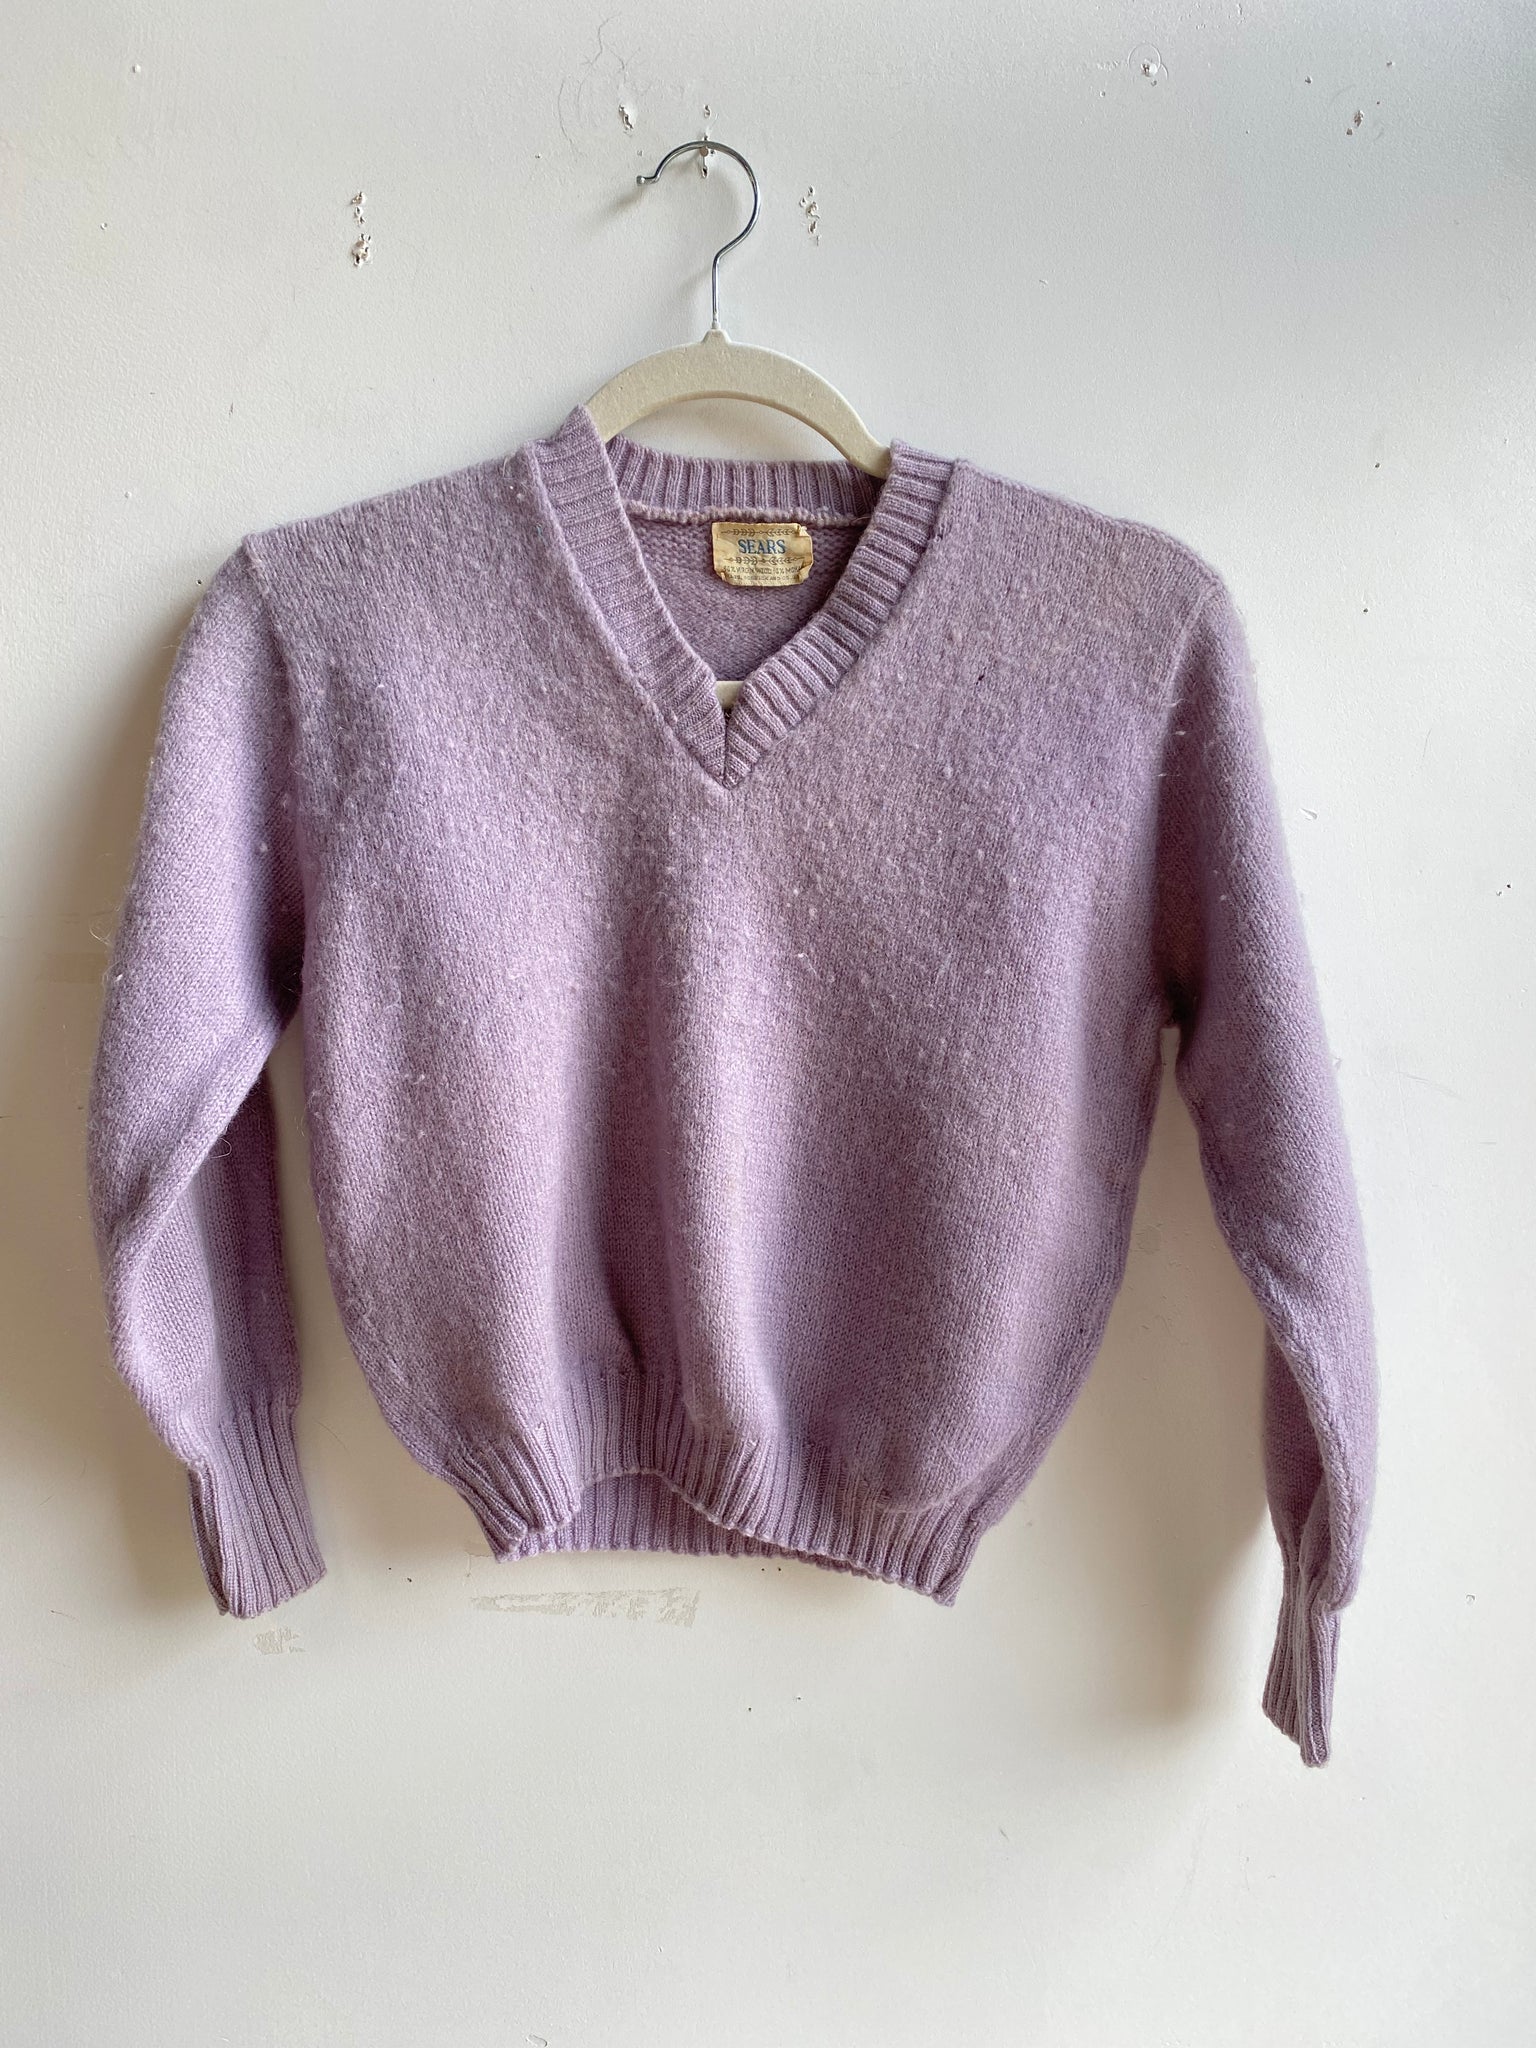 50s Lavender "Sears" Wool and Mohair Pullover